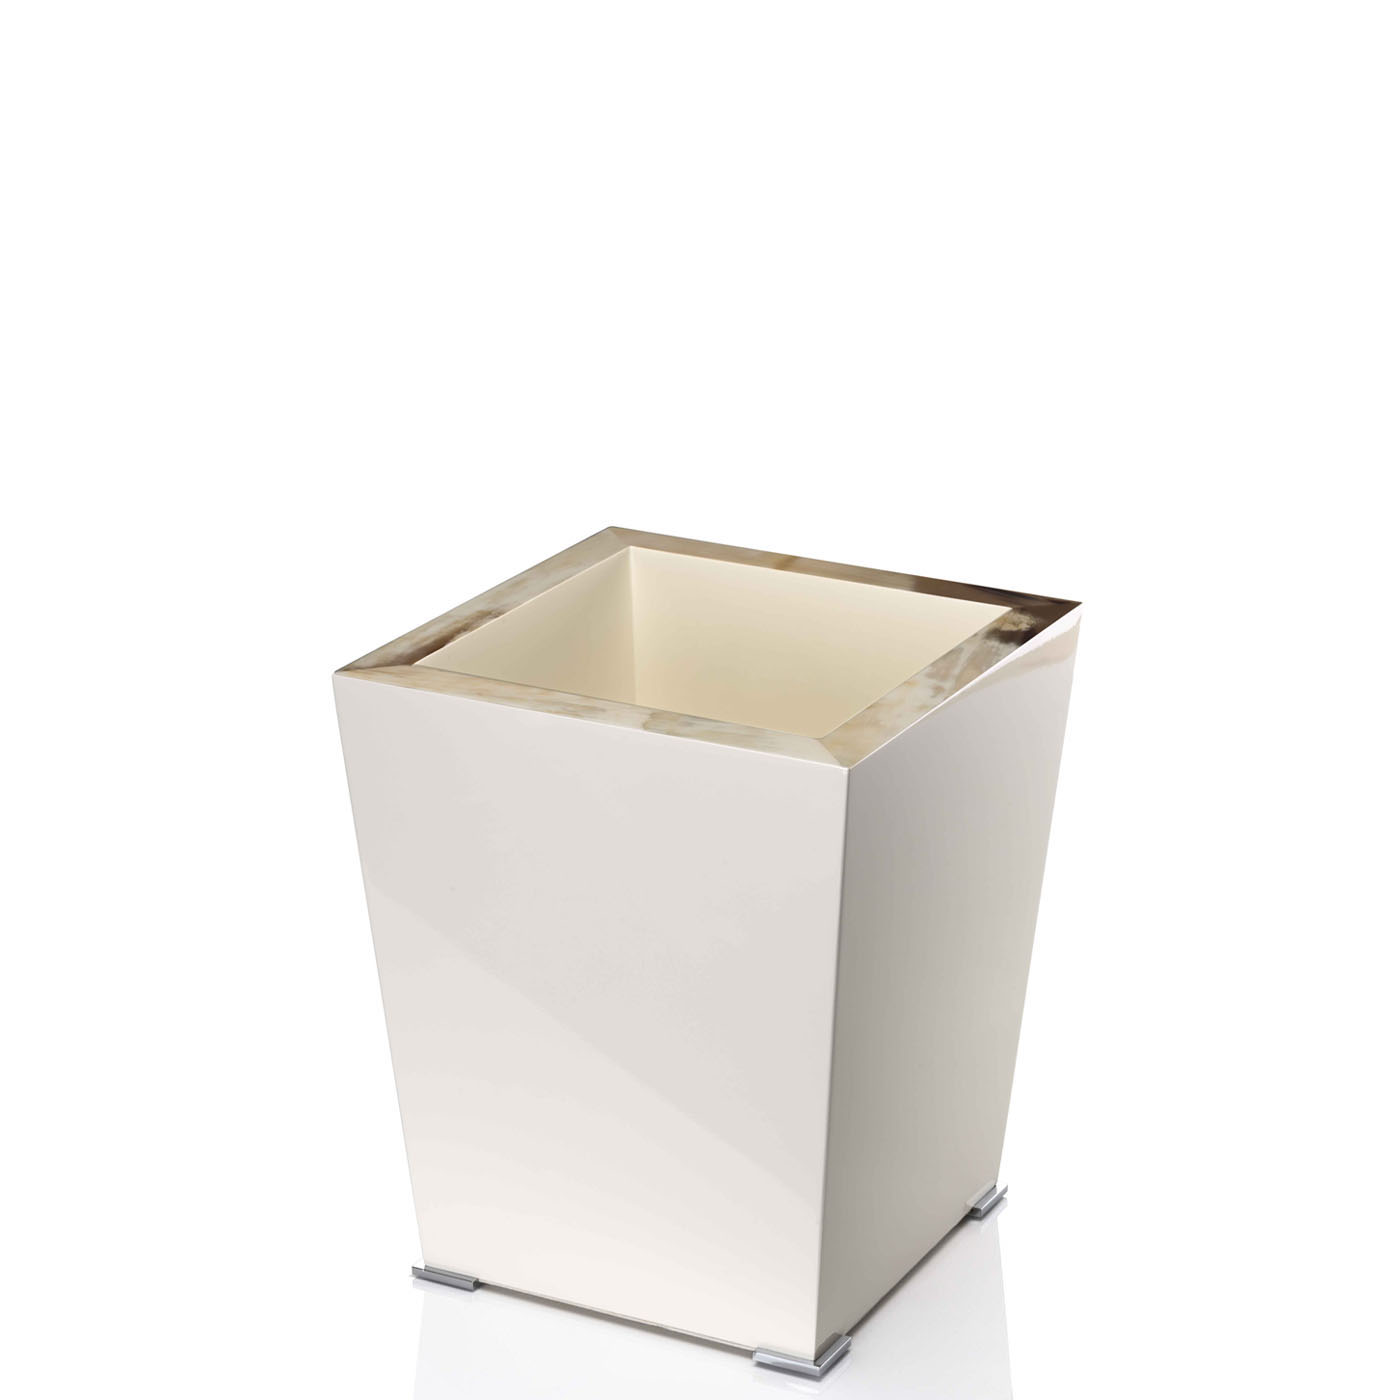 Bath sets - Fedro waste paper basket in horn and glossy ivory lacquered wood - Arcahorn